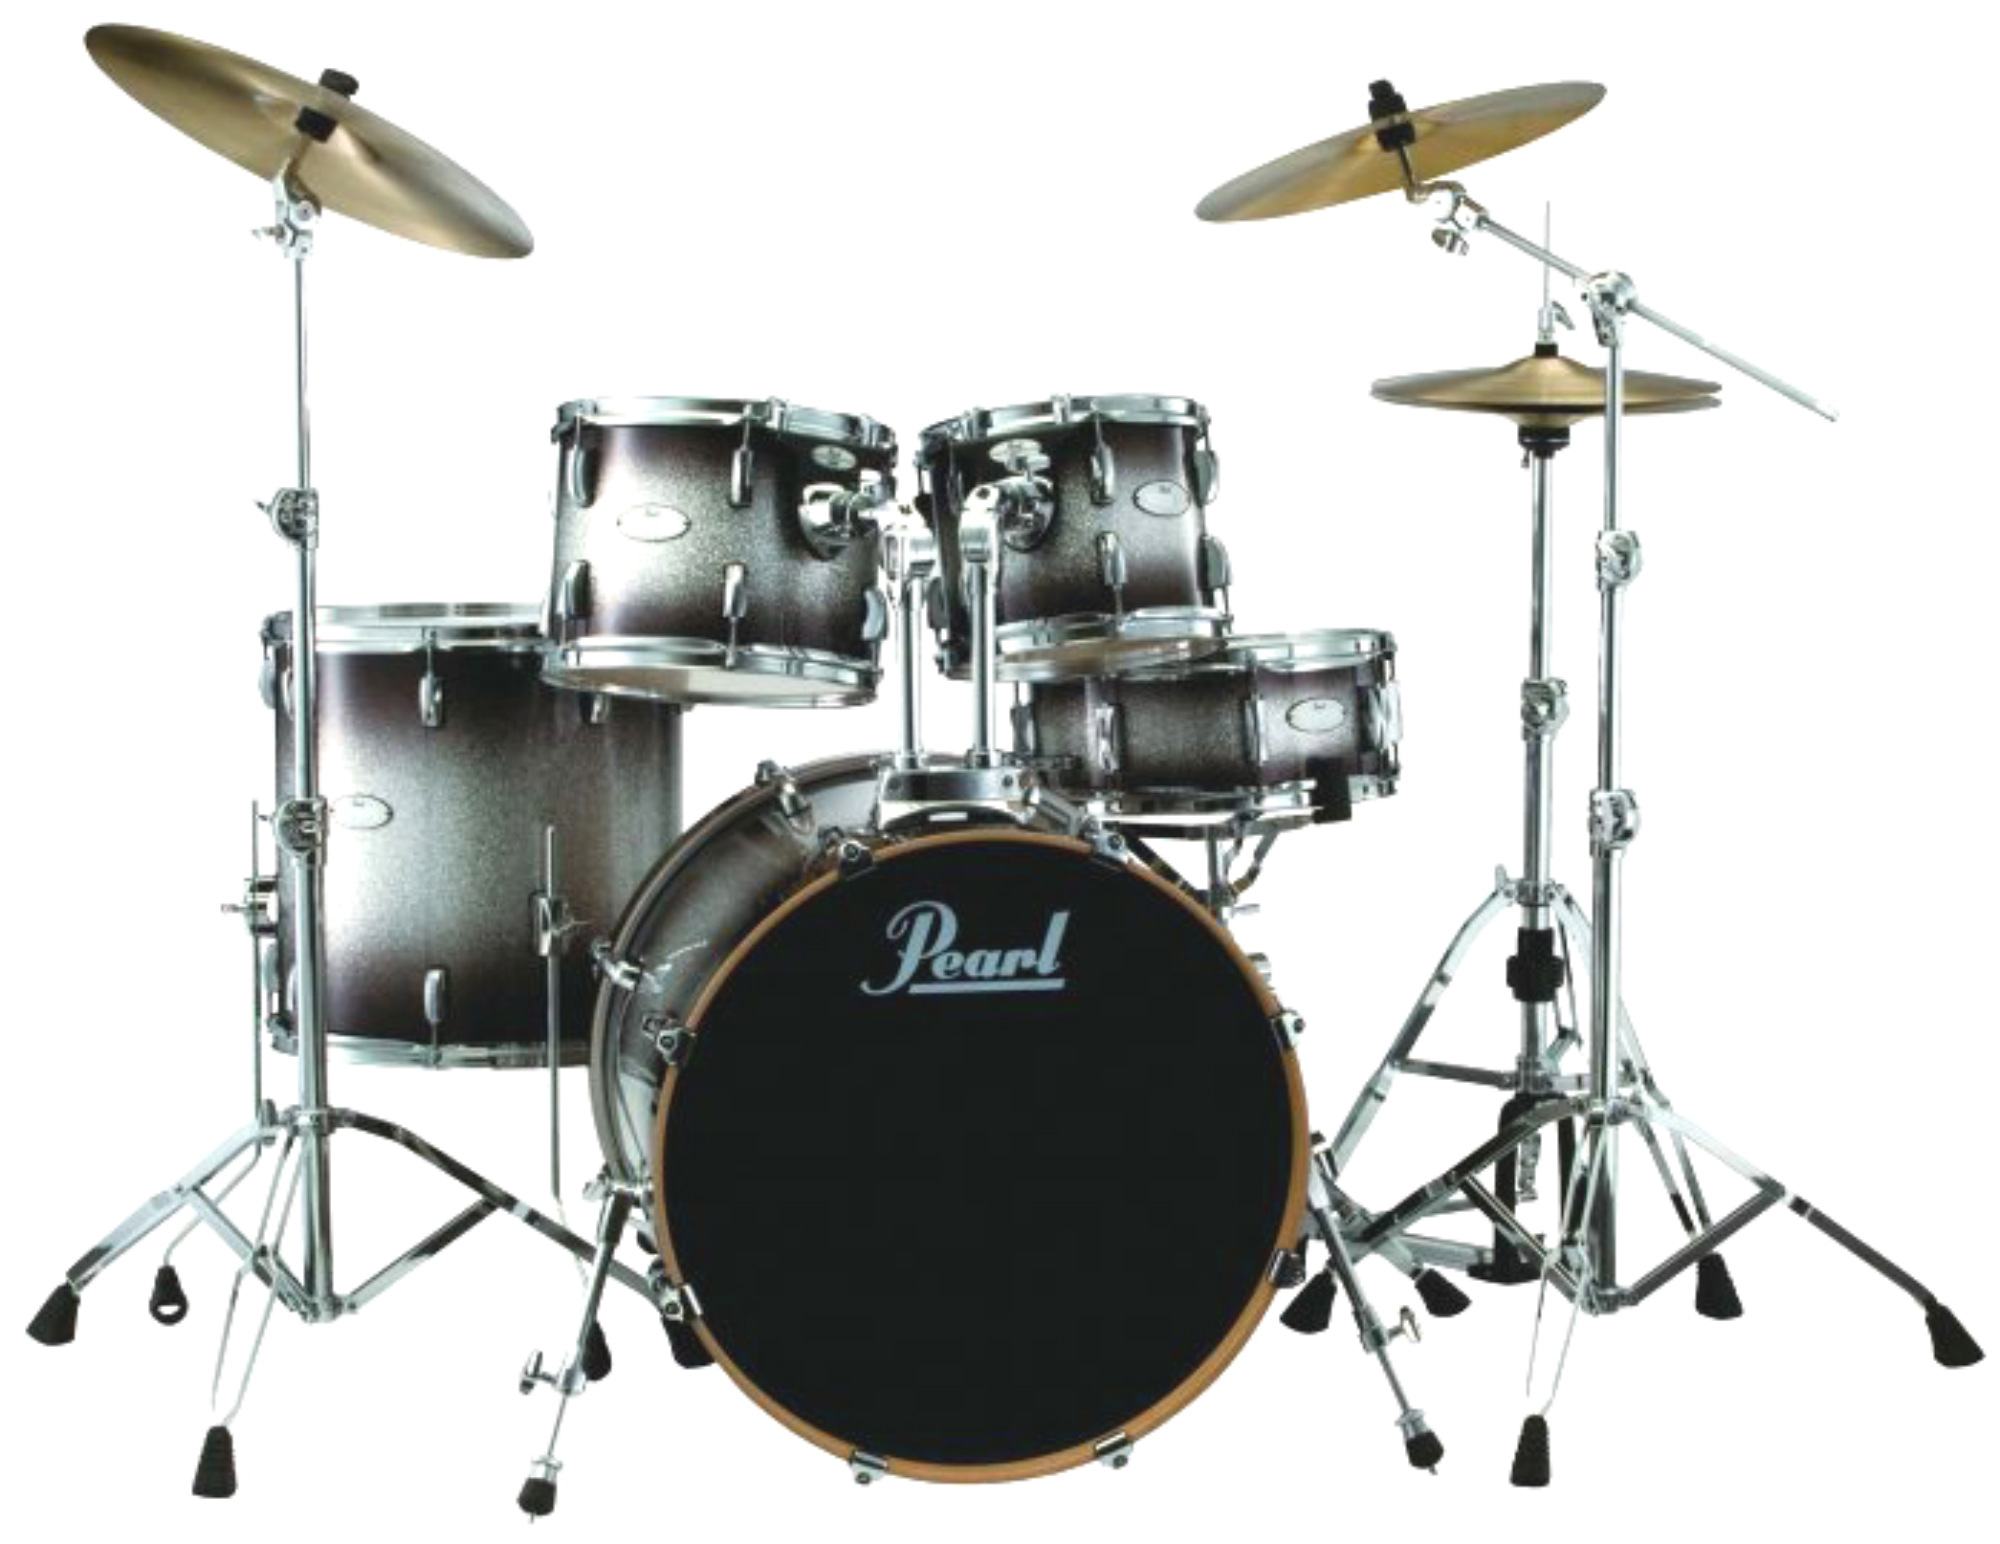 Amazing Drums Pictures & Backgrounds